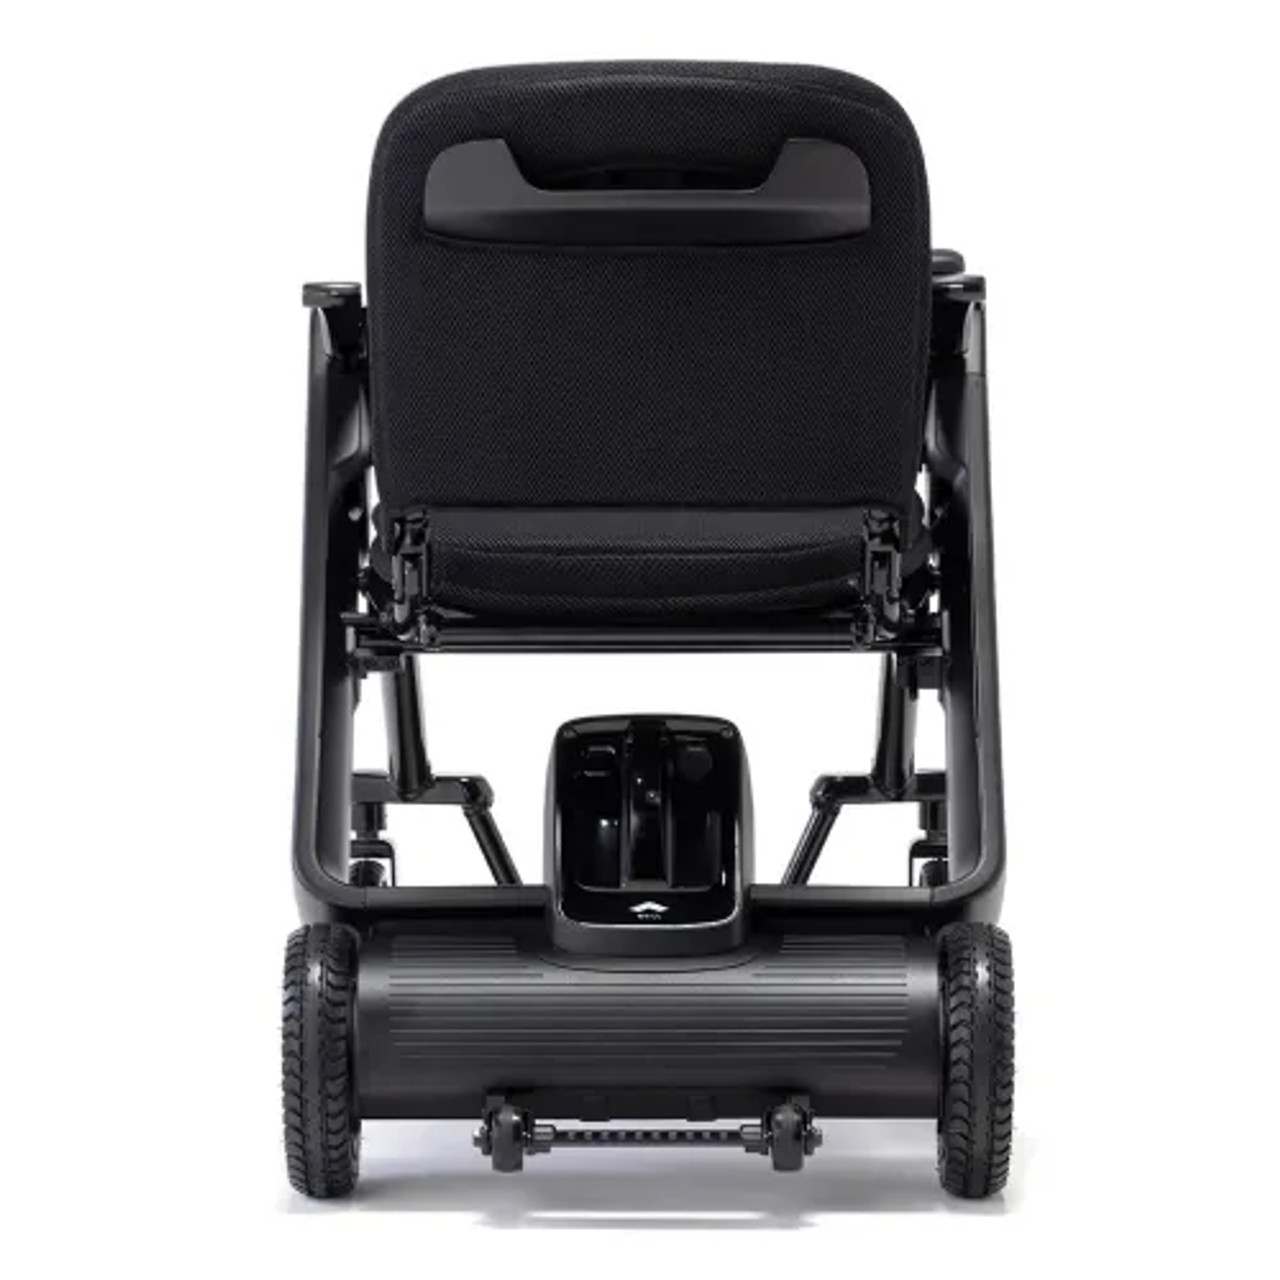 Whill Wheelchair - Model F: Folding Design, Comfortable Support, Travel-Friendly-Chicken Pieces